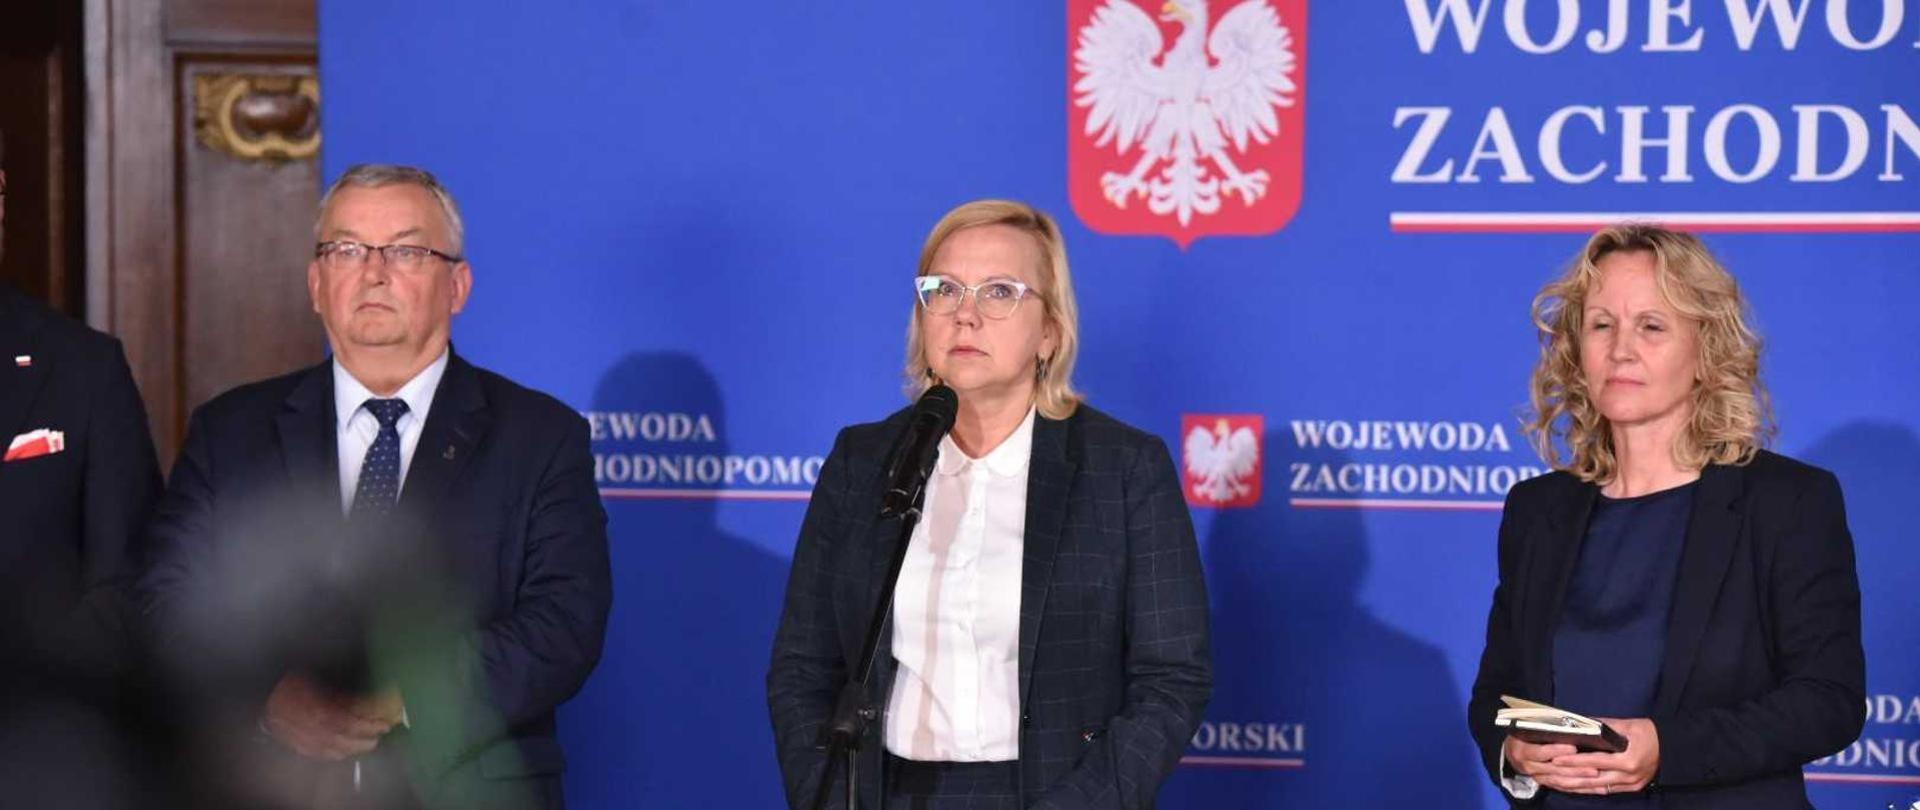 Meeting of Polish and German ministers regarding the Odra River